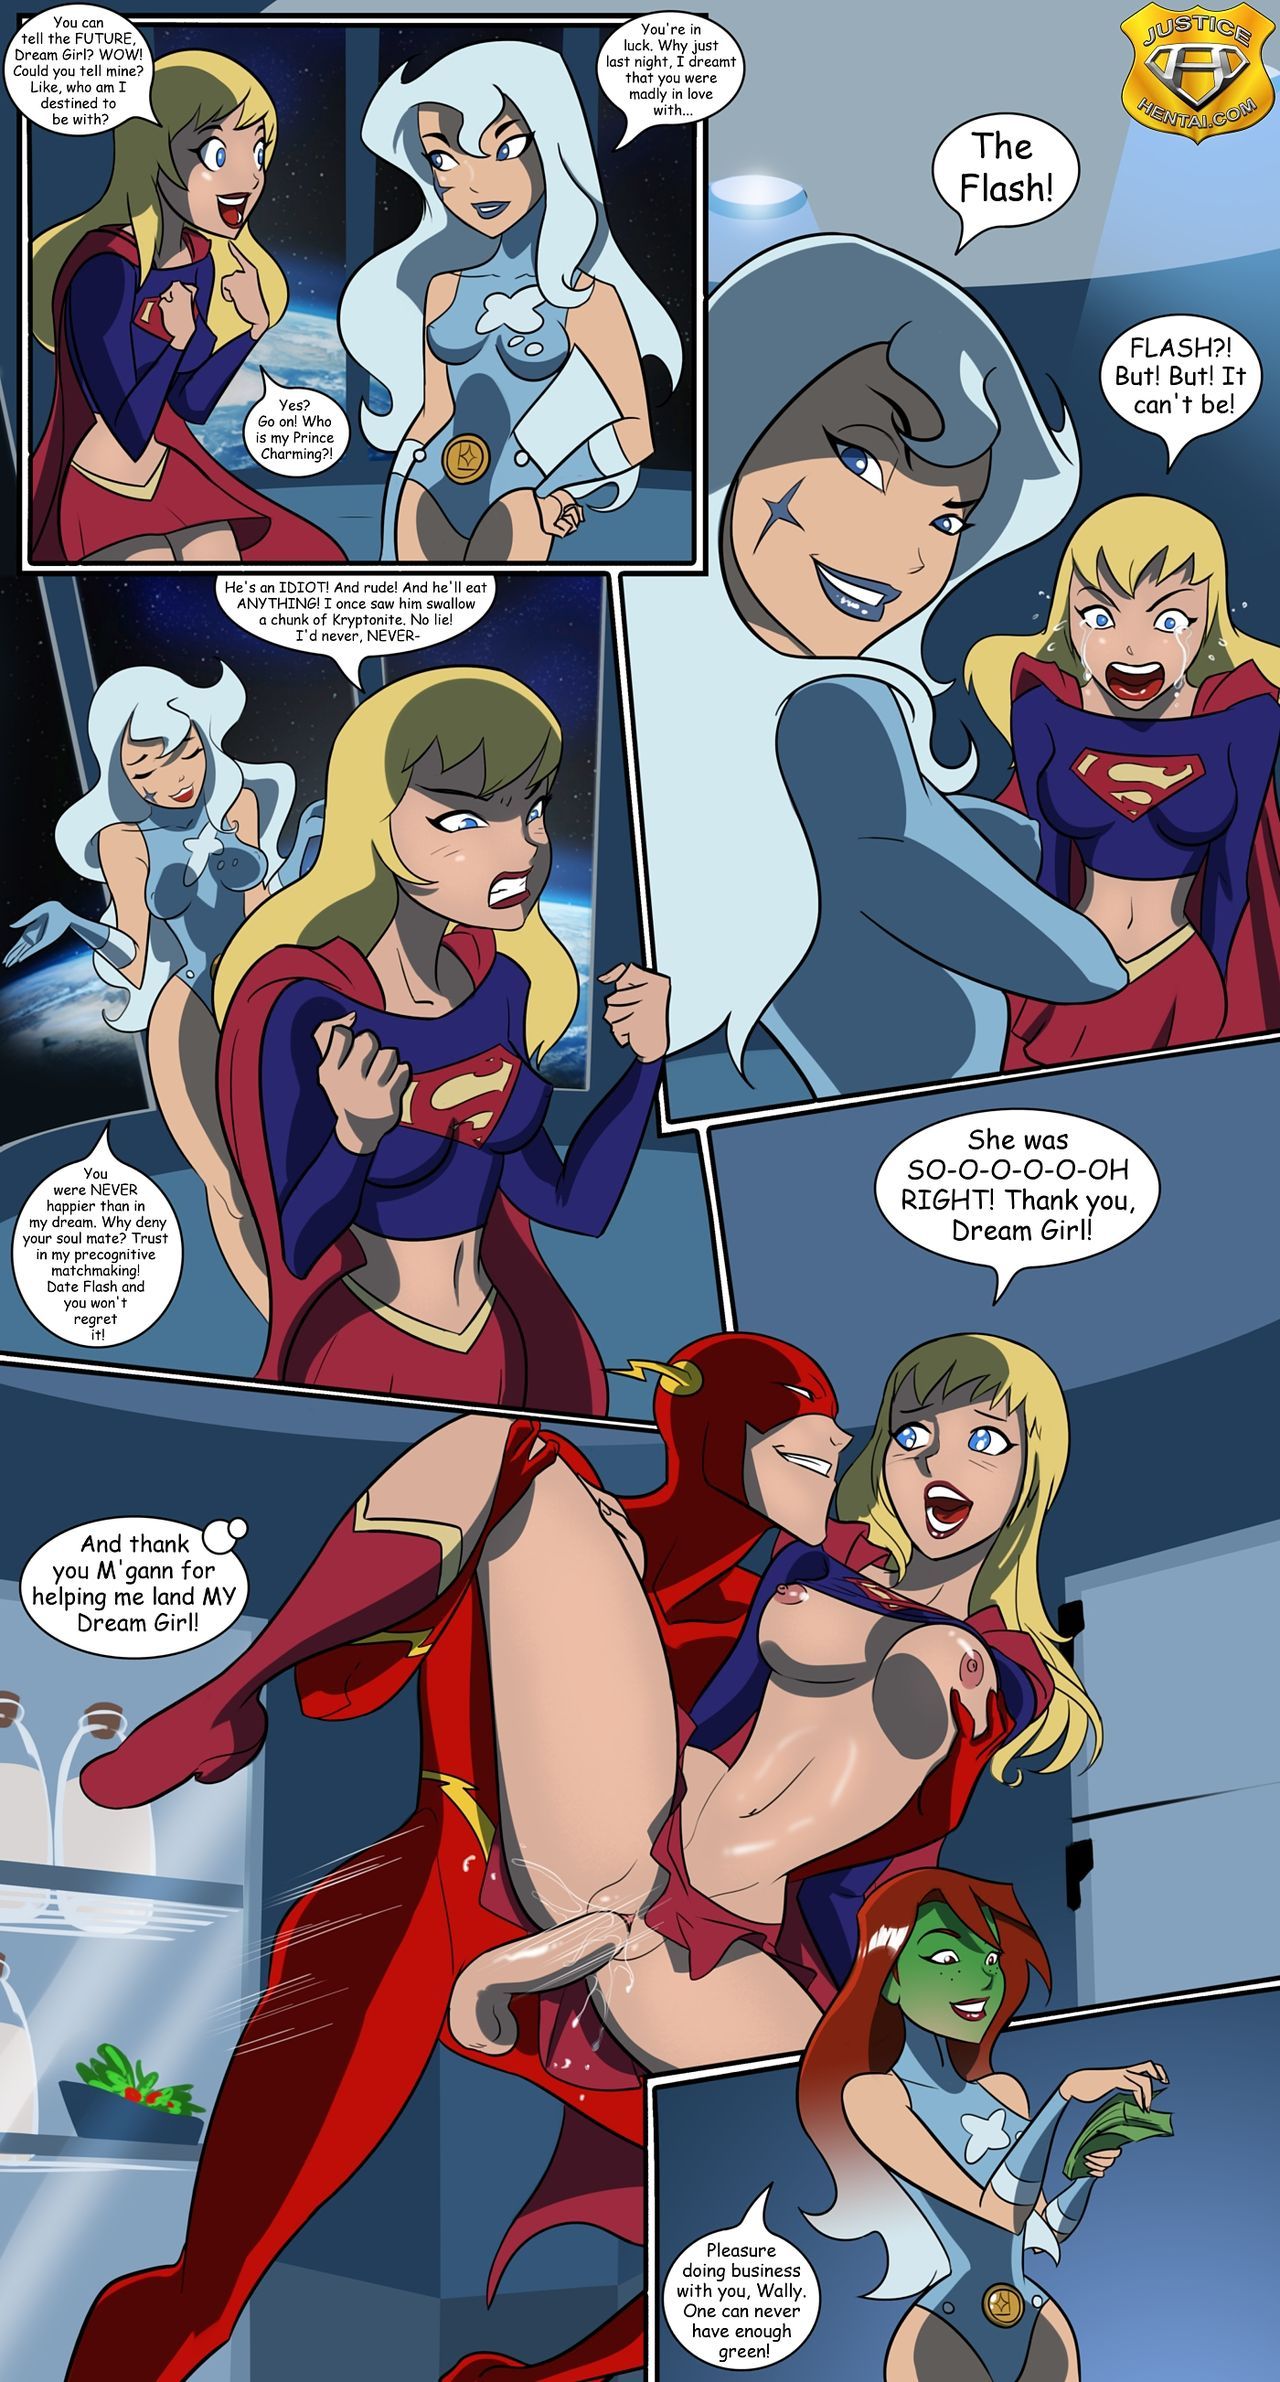 [JusticeHentai.com]New from Justice Hentai (Various Superheroines) (updating) 21